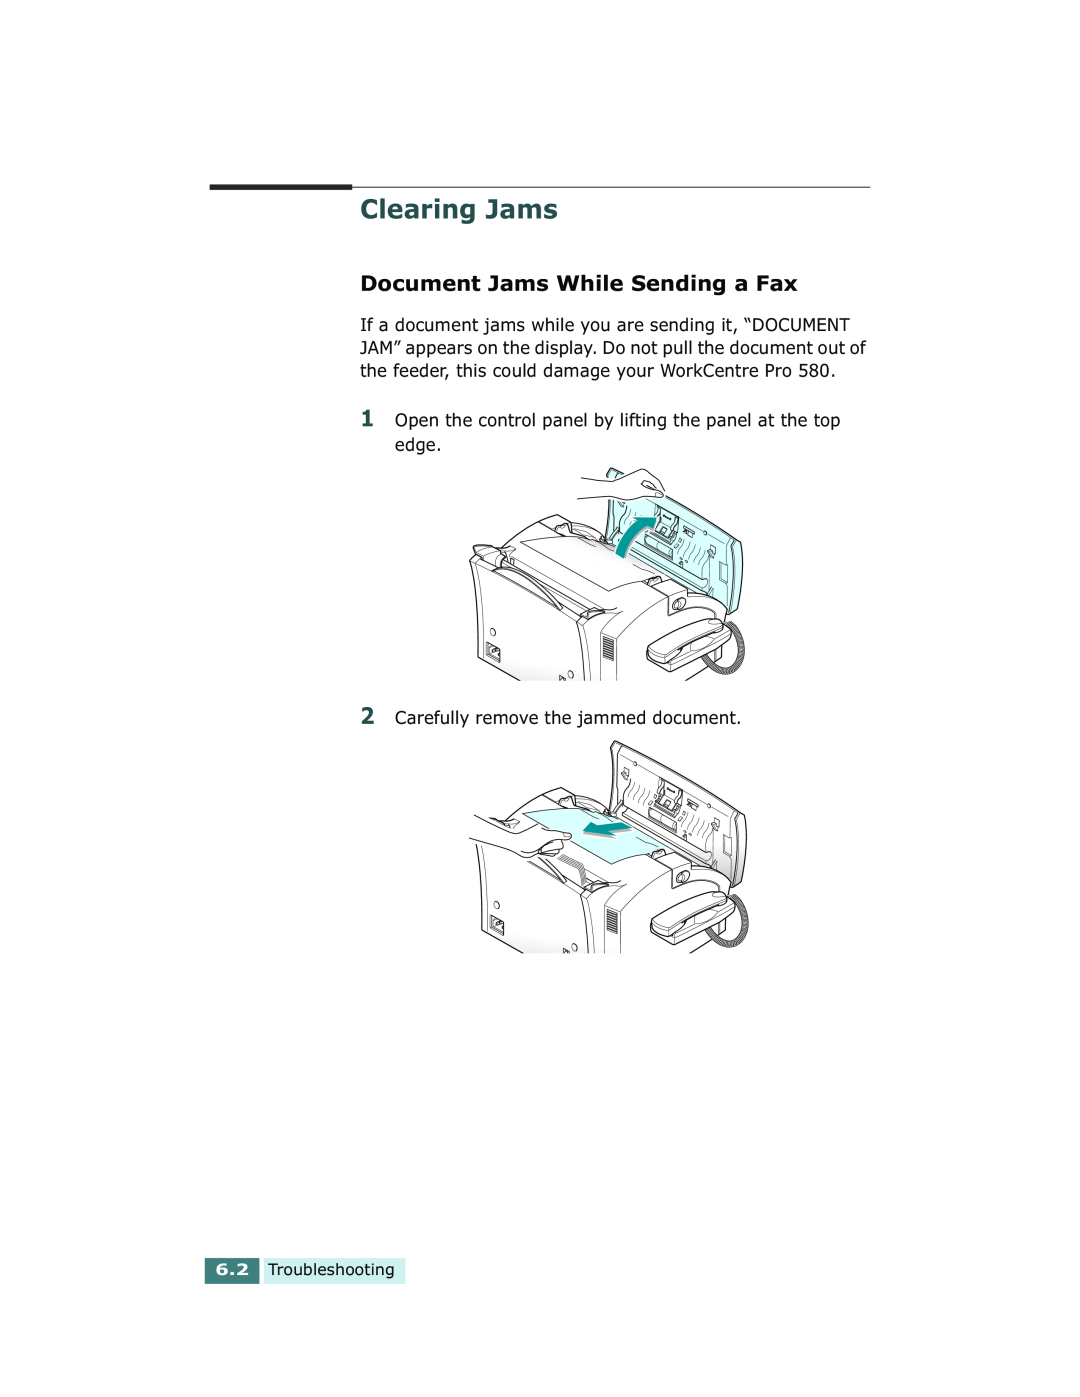 Xerox Pro 580 manual Clearing Jams, Document Jams While Sending a Fax 